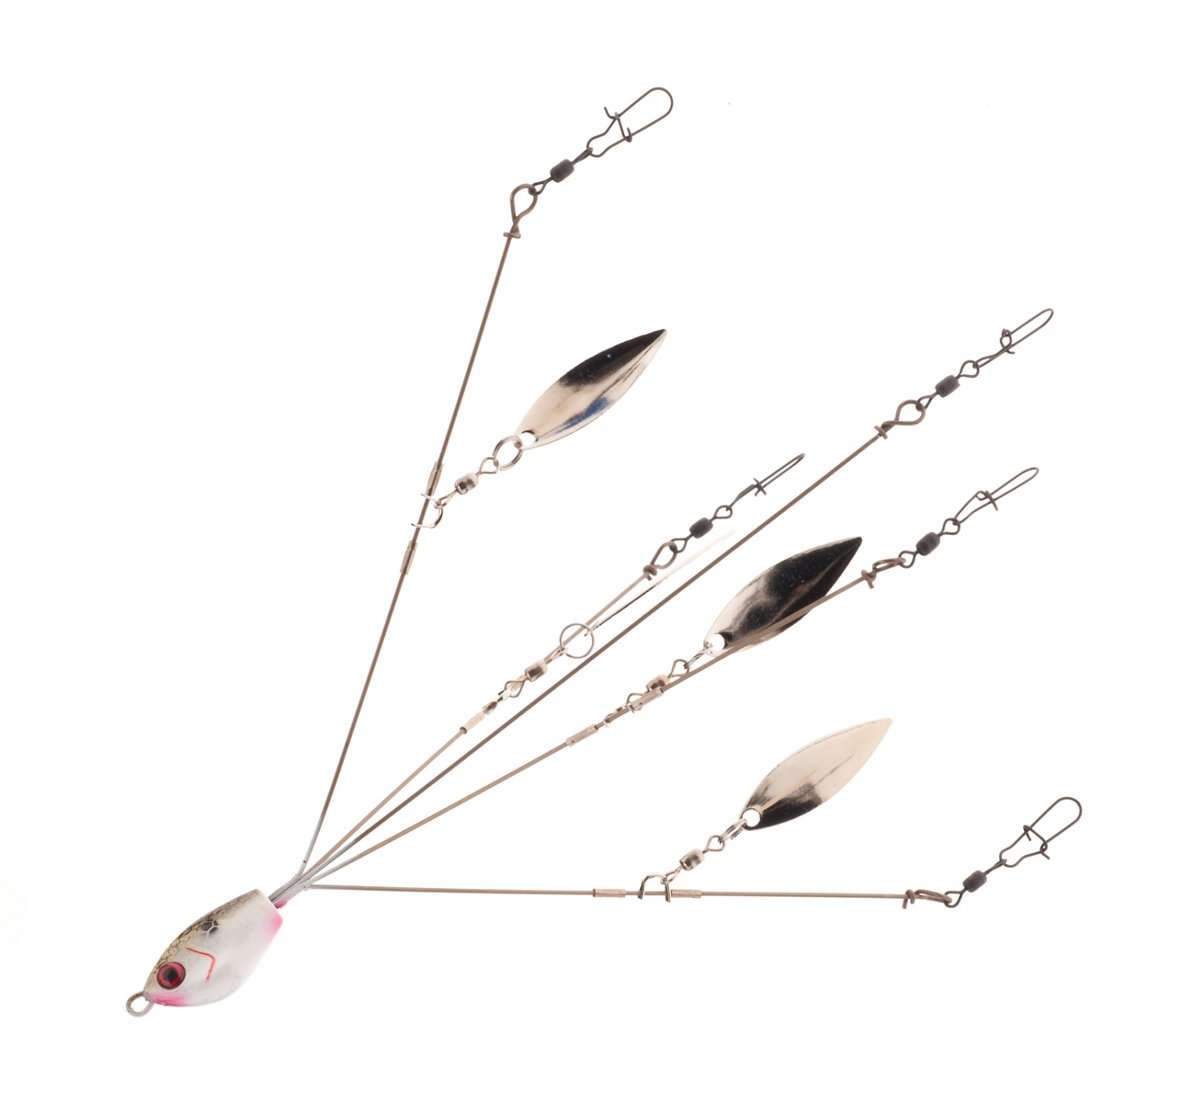 <h4>Umbrella Rig</h4><BR>
Ever been up late at night and saw one of those infomercials for a new fishing lure that is supposedly âso good itâs illegal in tournaments?â Chances are, they were just making that stuff up â unless the commercial was for an umbrella rig. 